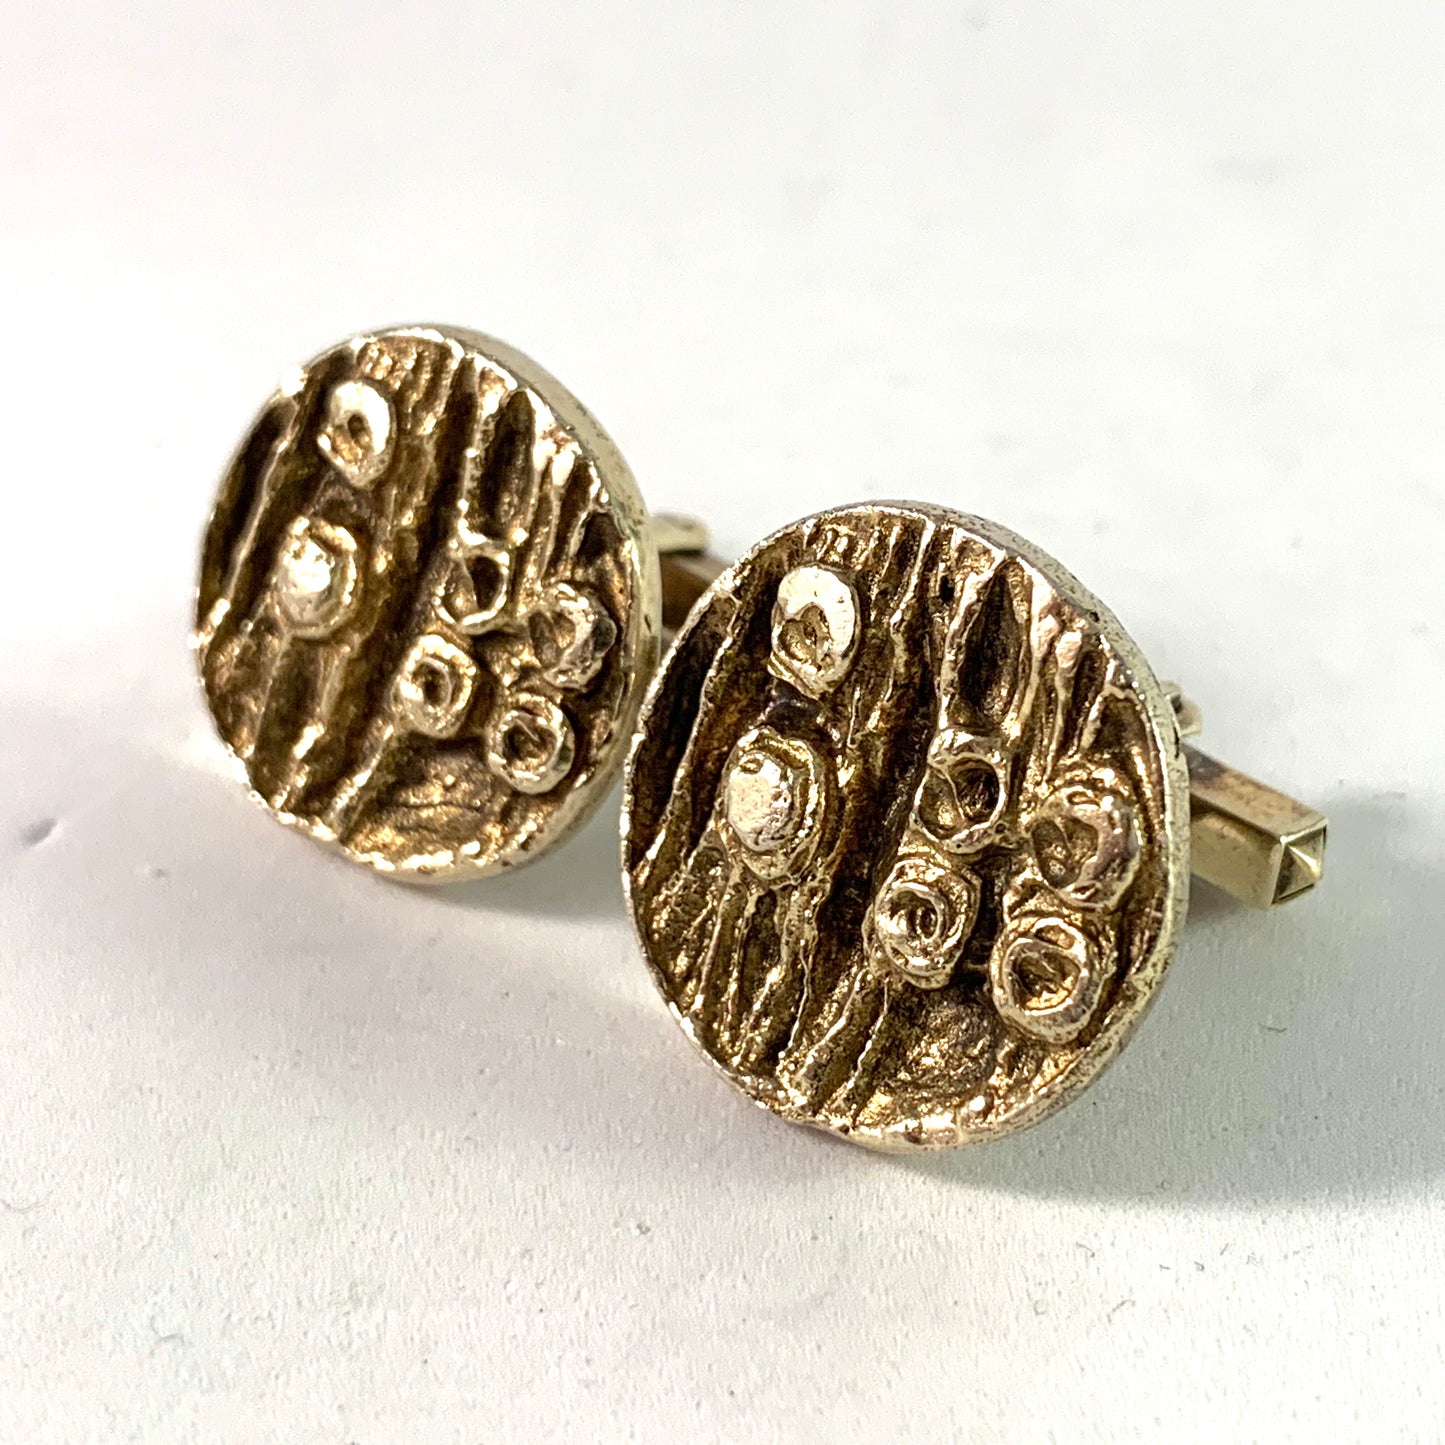 Vintage 1960s Gilt 935 Sterling Silver Large Pair of Cufflinks.